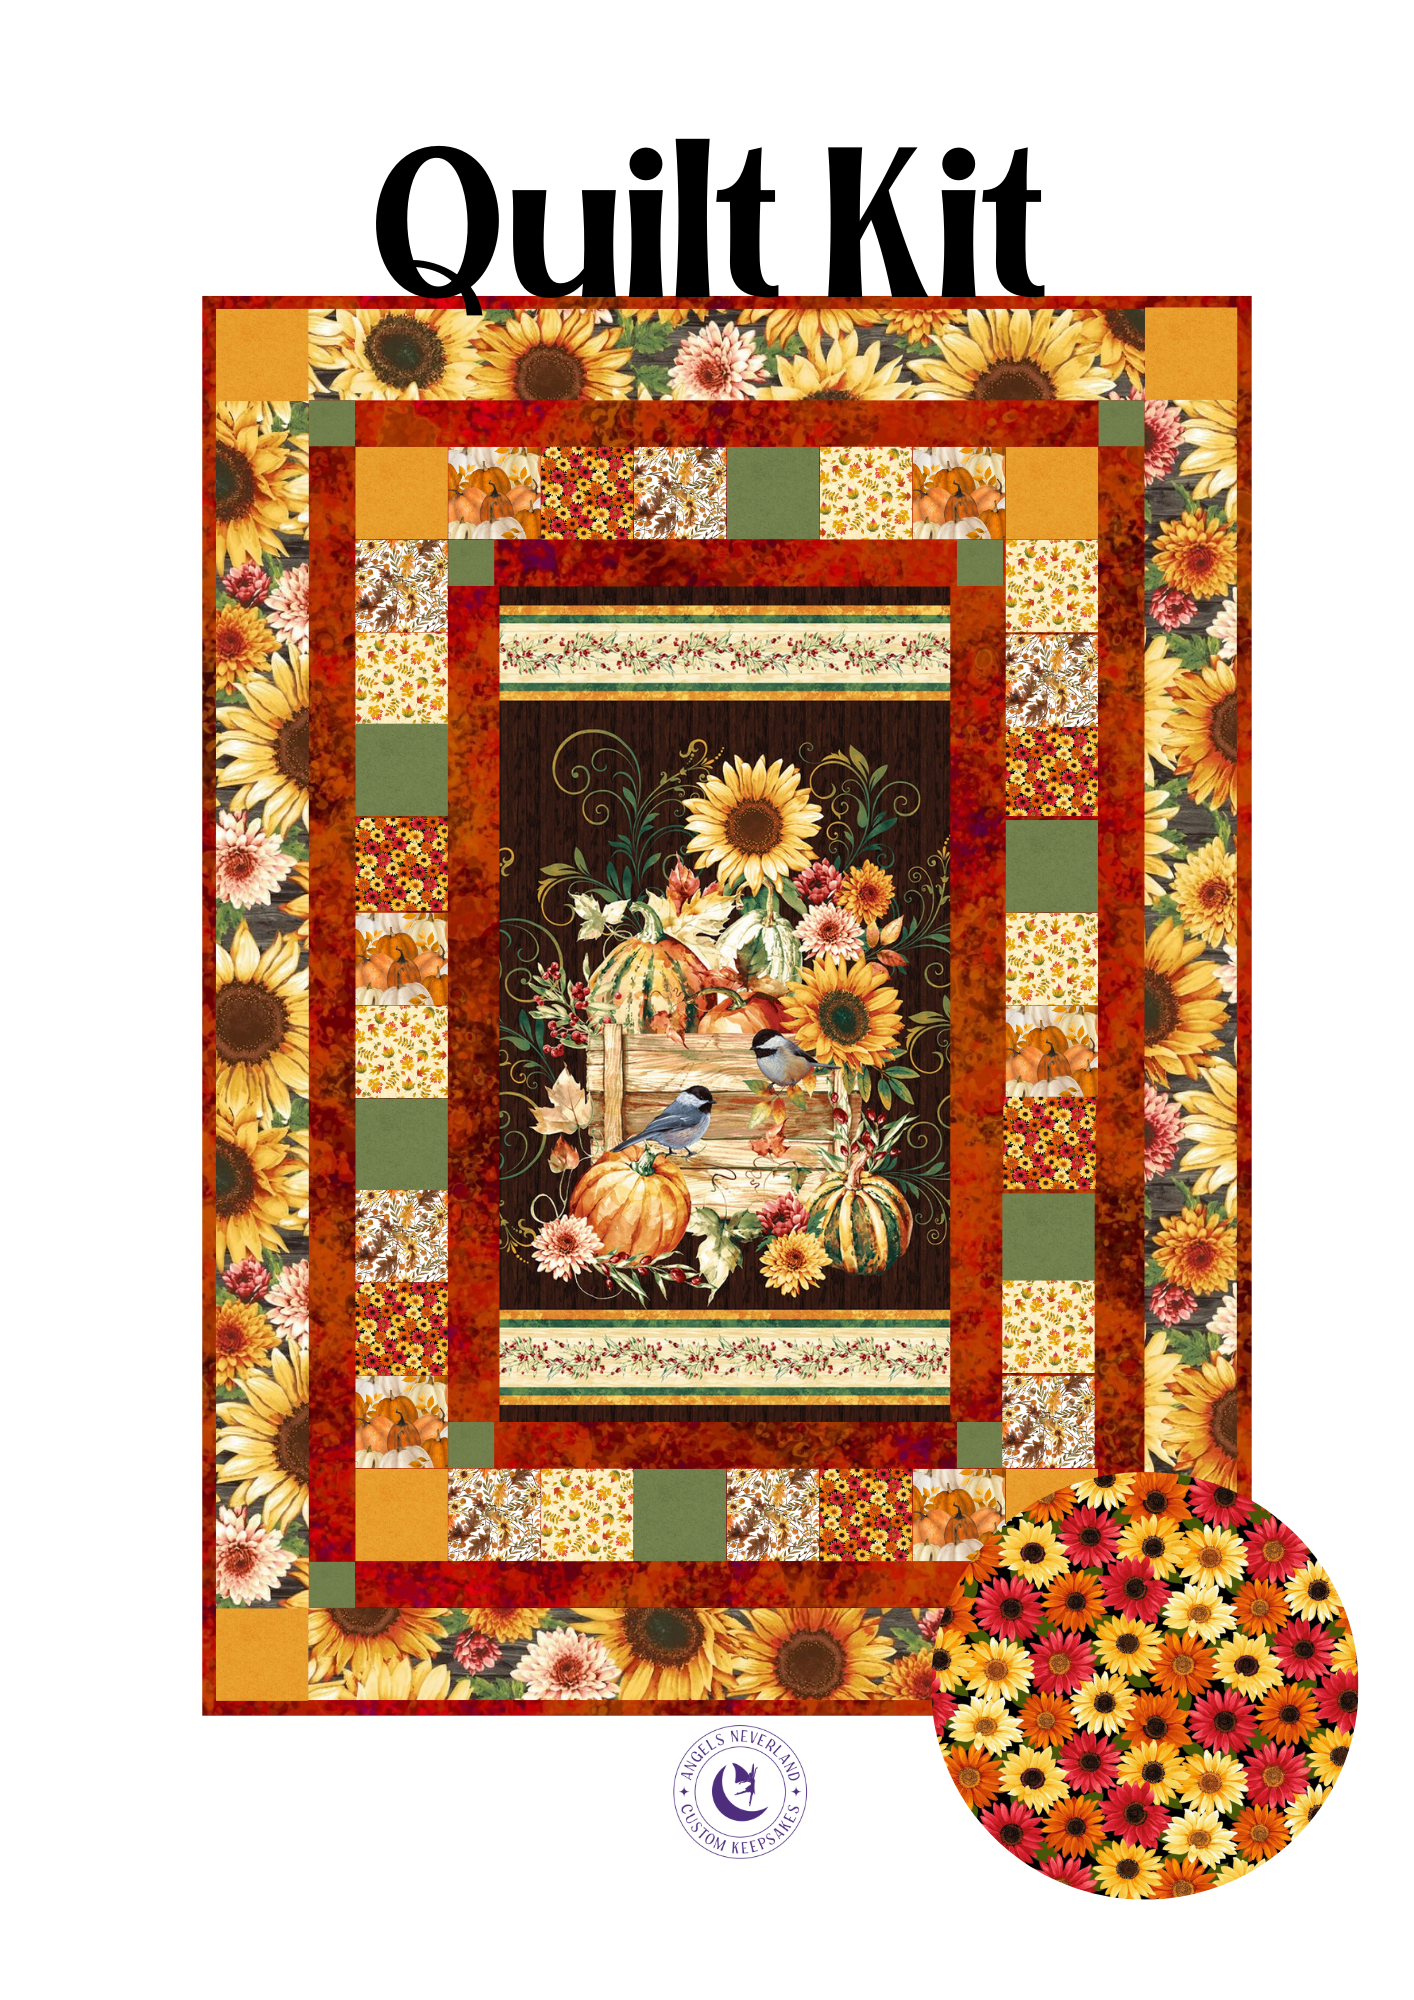 Studio E Quilt Kit Fall into Autumn Quilt Kit with complimenting fall fabrics using Picture This Pattern